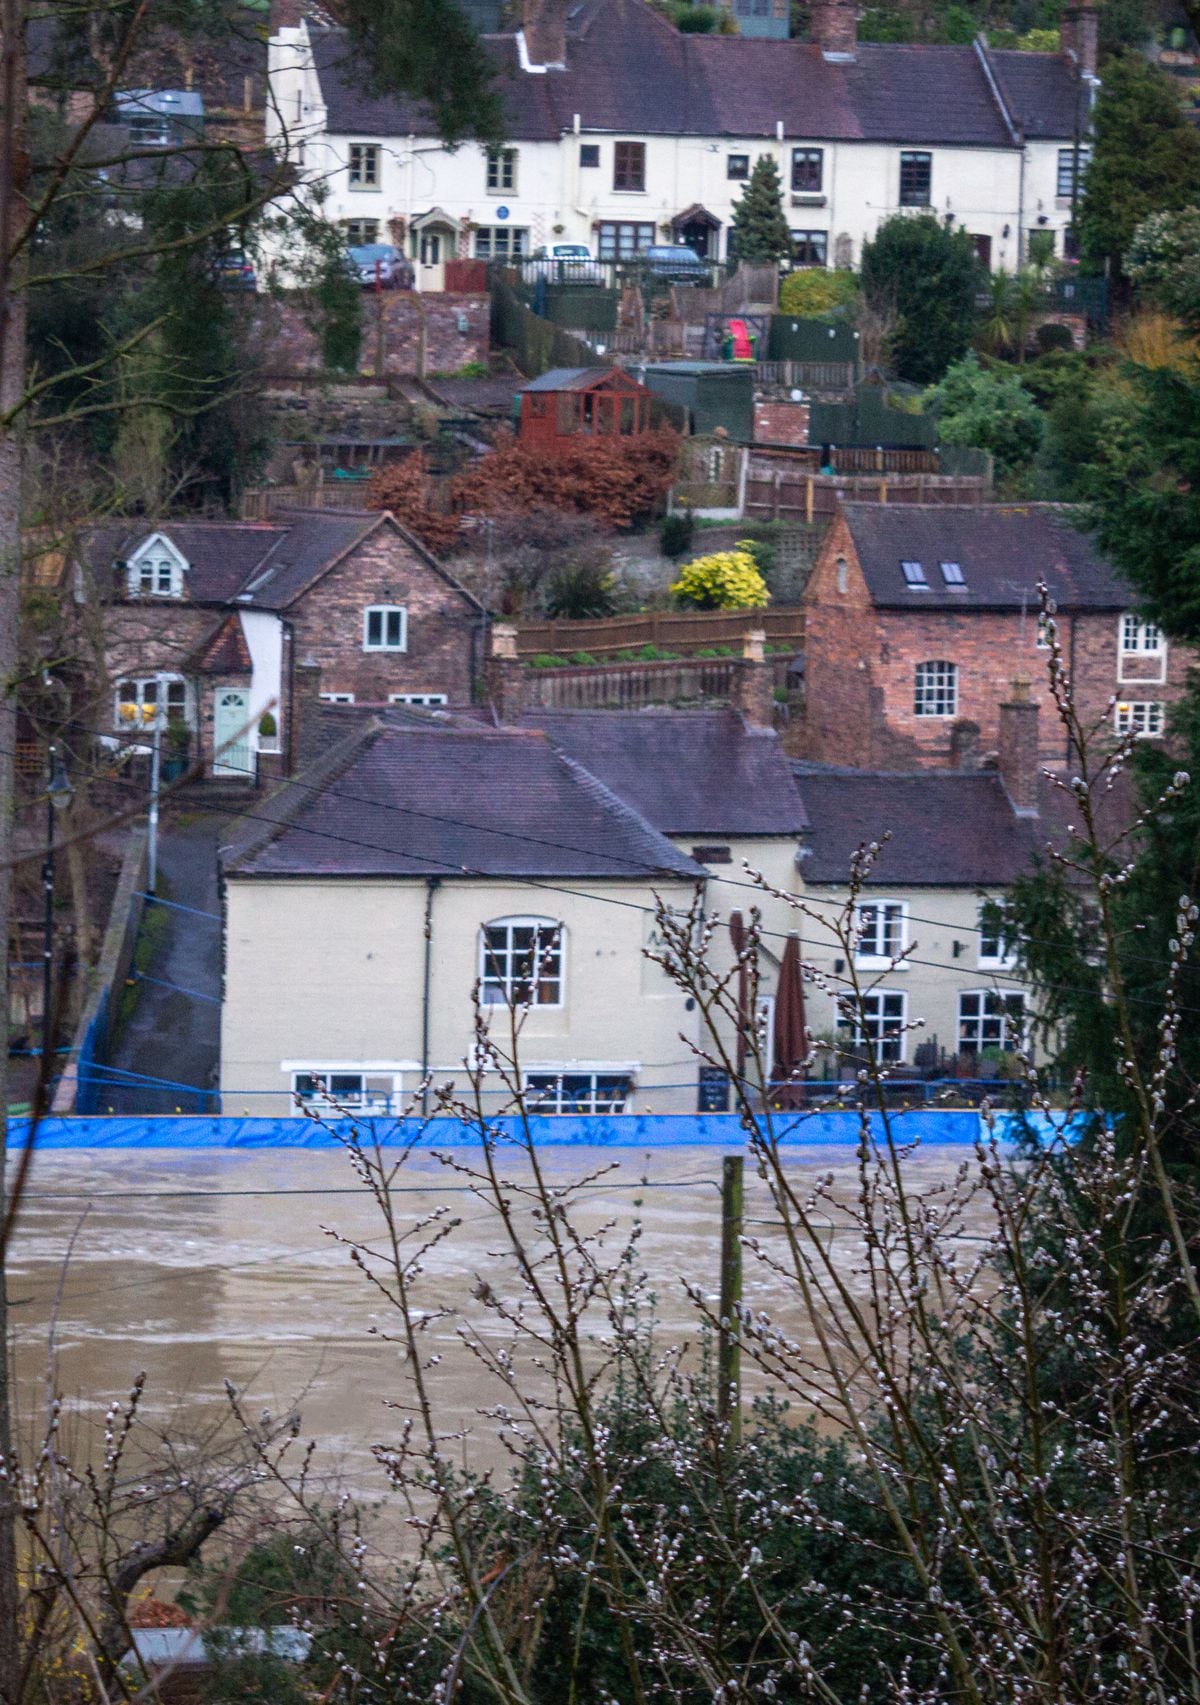 Flooding in Jackfield and Ironbridge. Pic: Dylan Evans